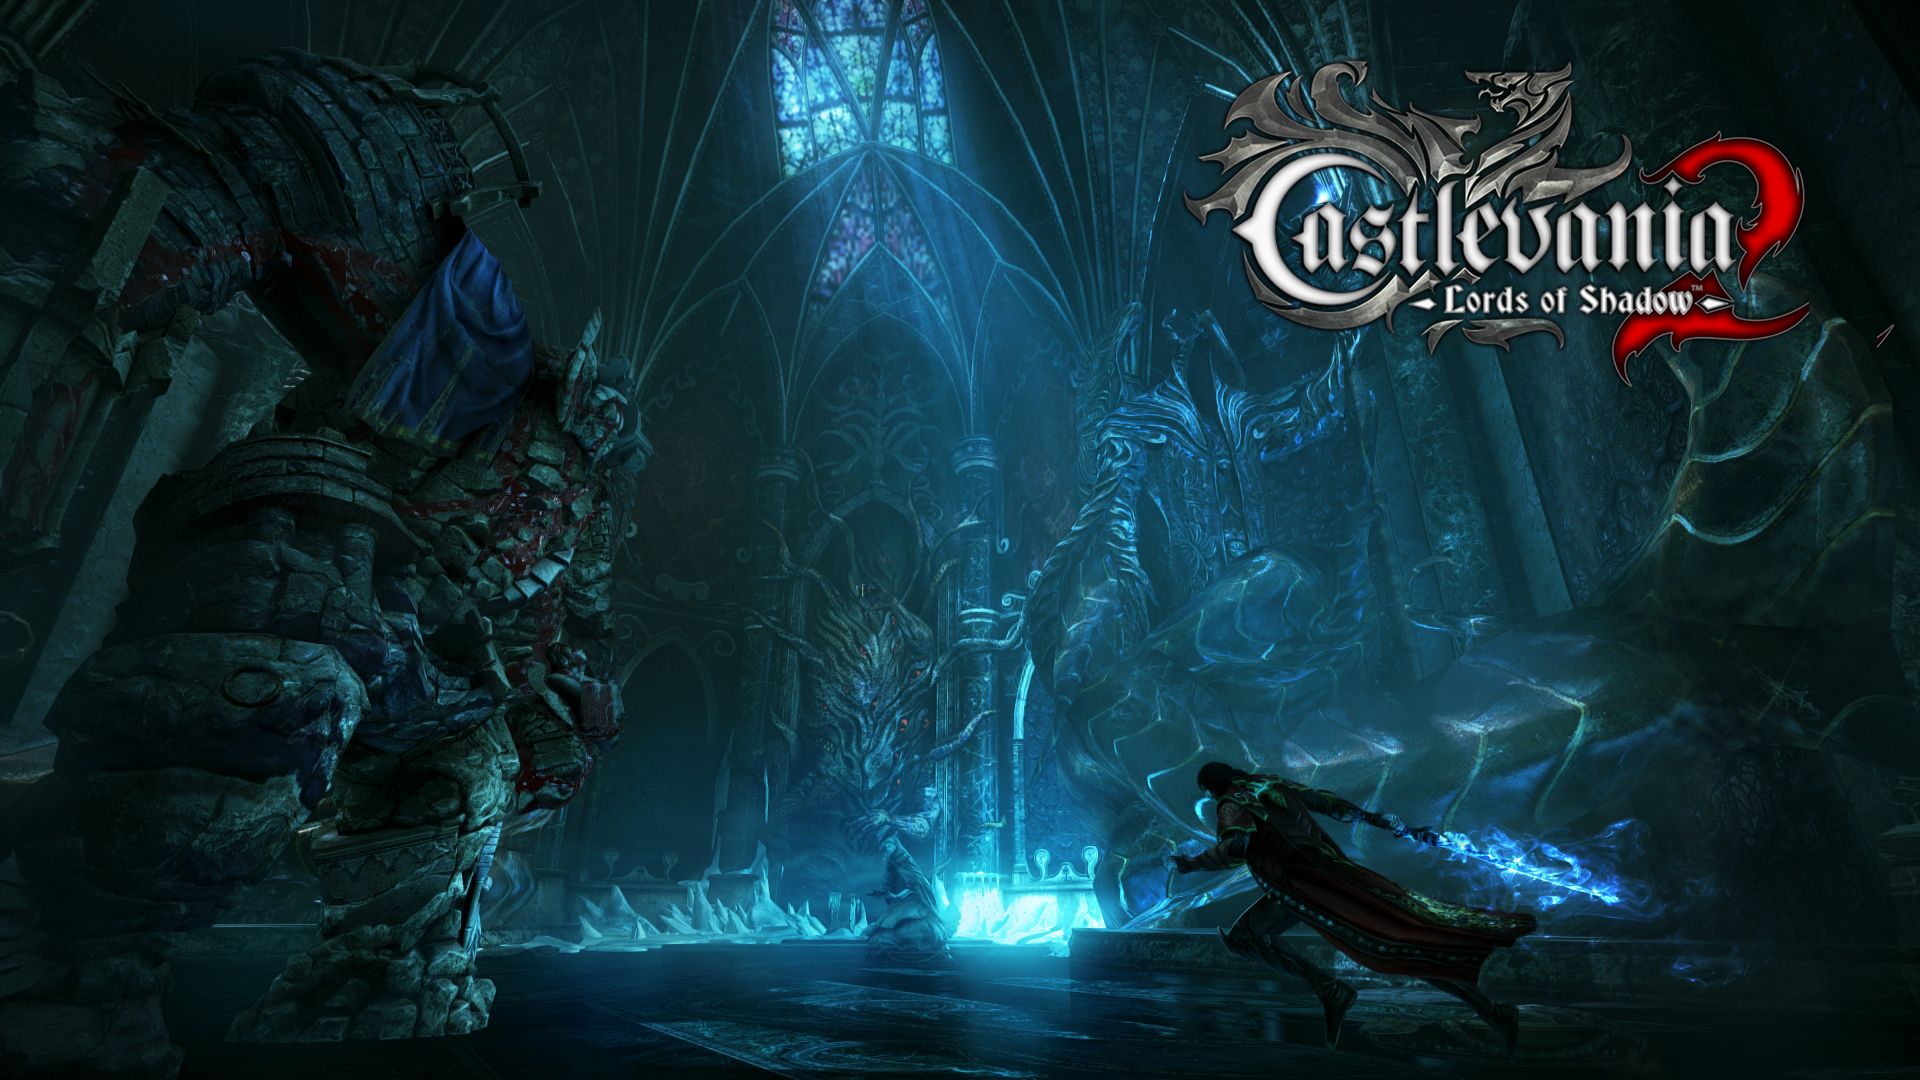 Challenge Trophée - Castlevania: Lords of Shadow : "Chapitre I"